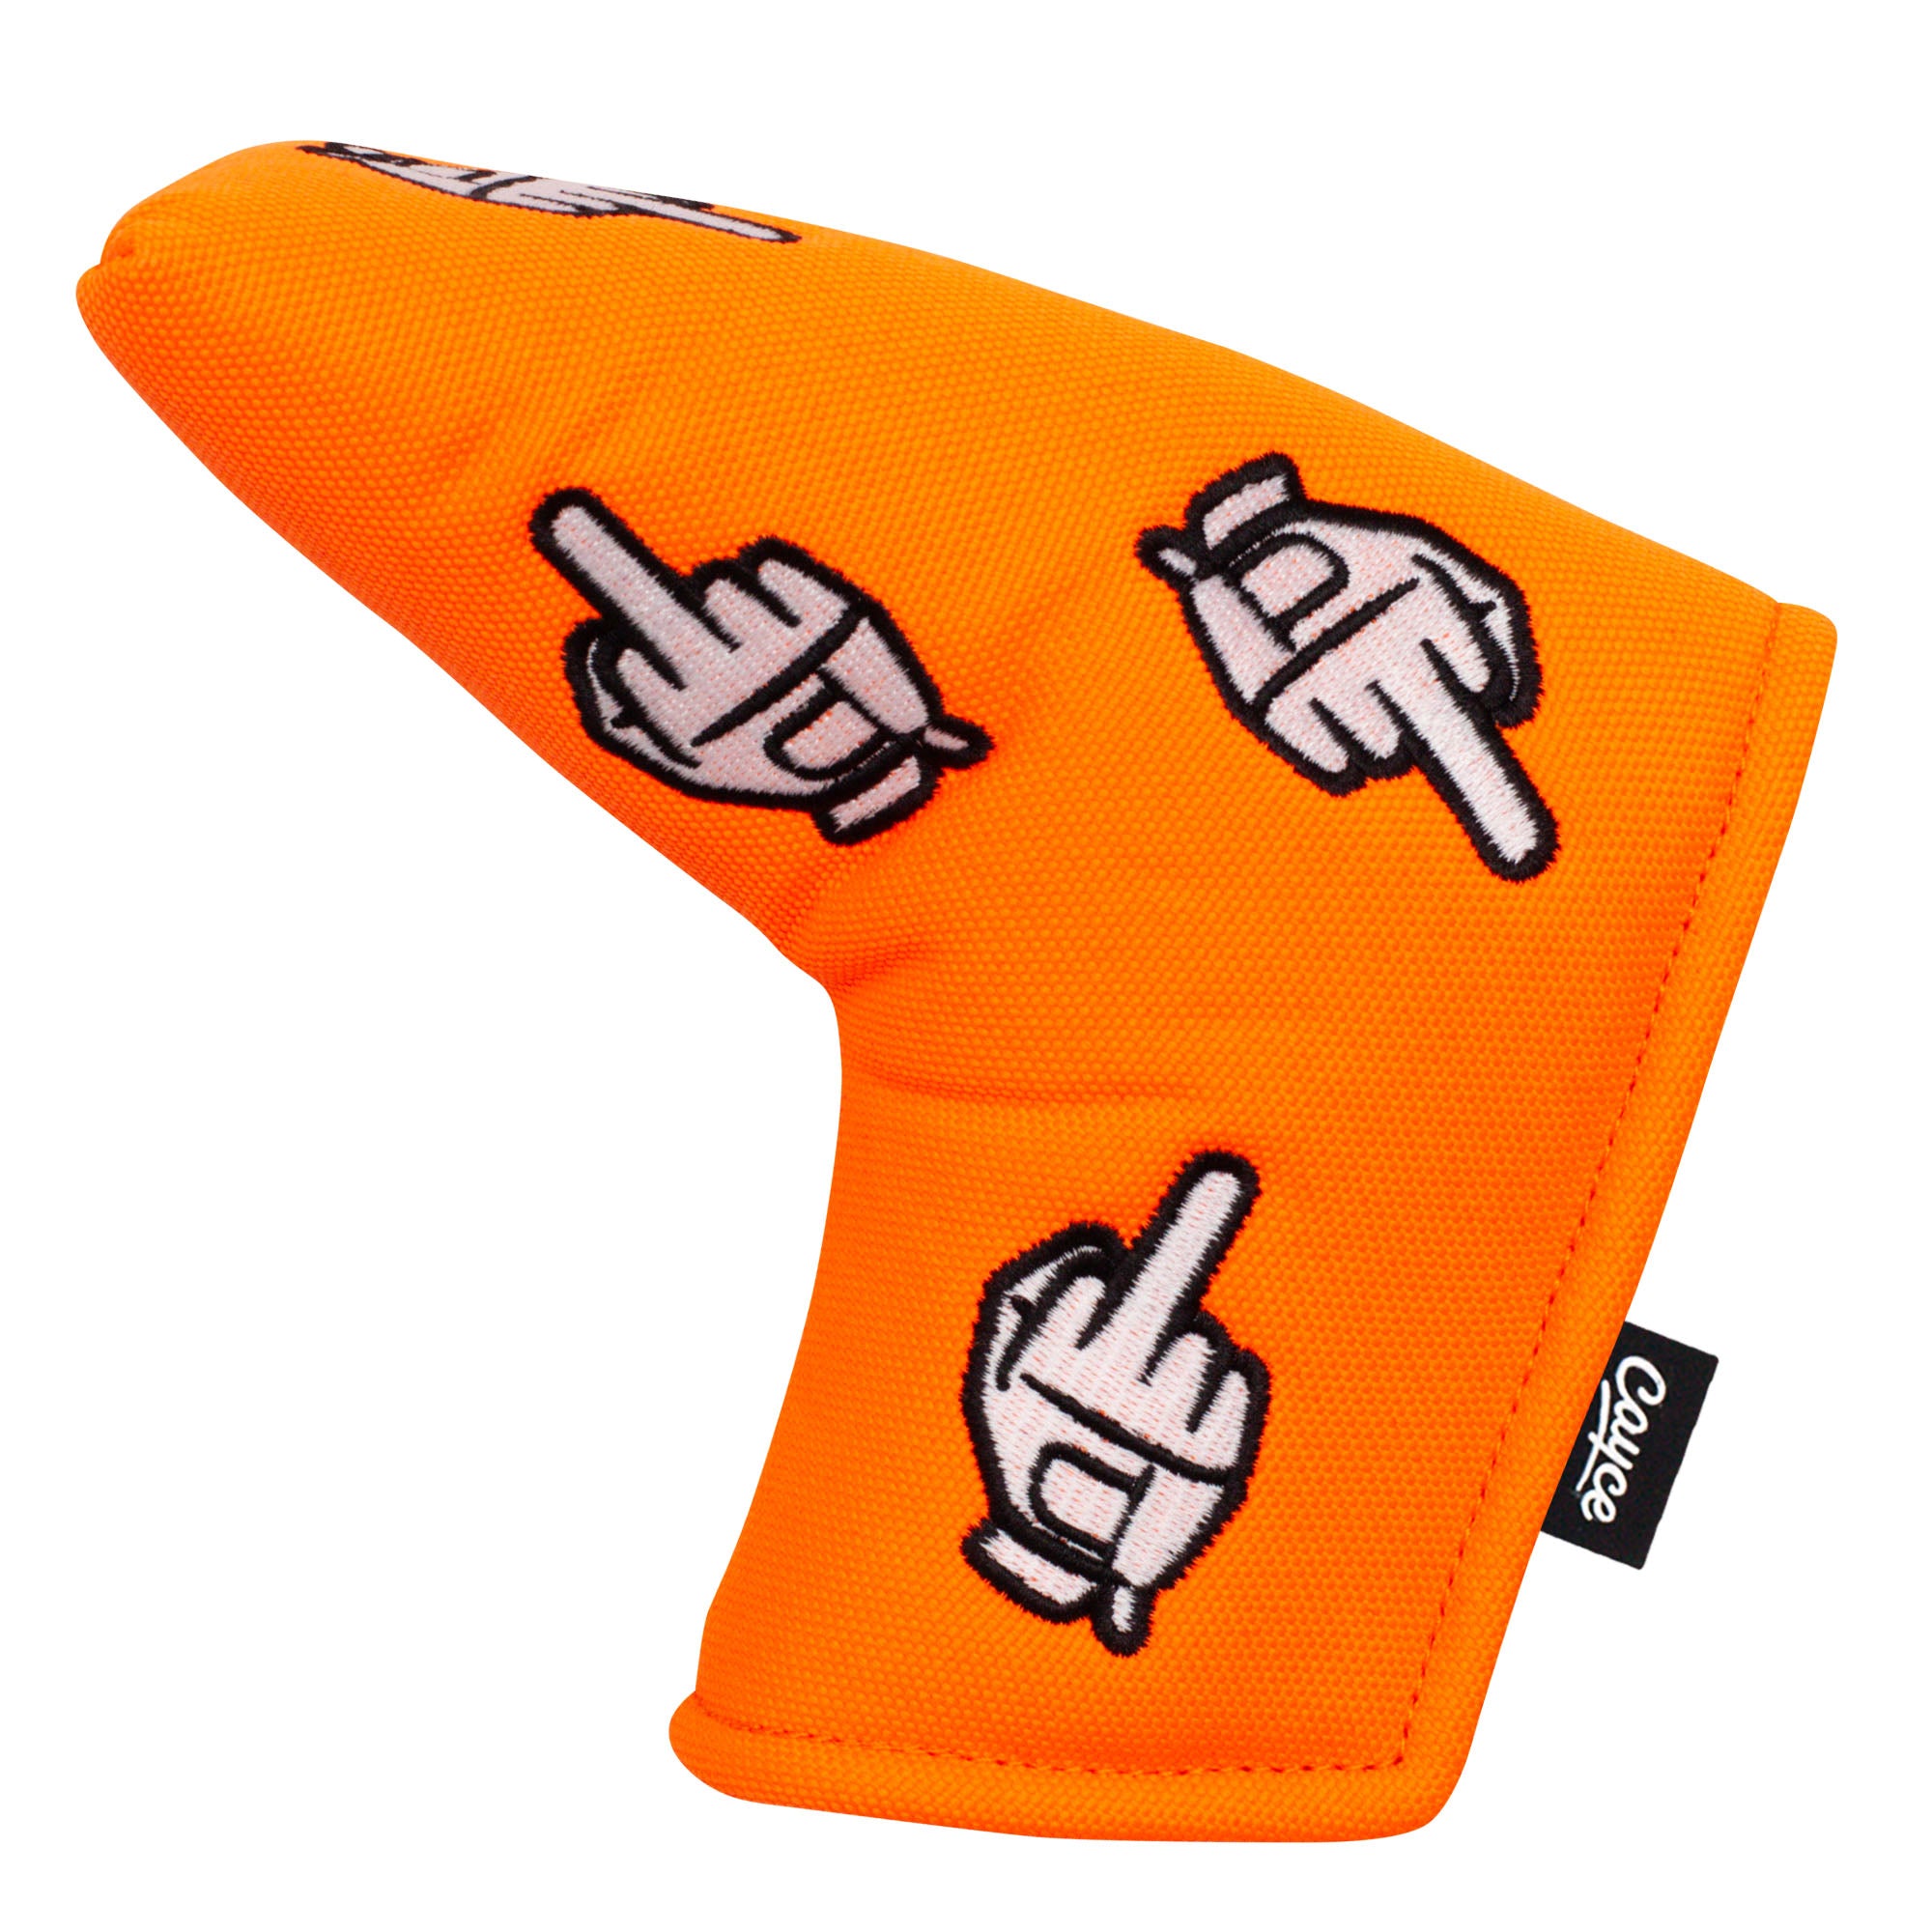 A fluorescent orange magnetic blade putter cover with embroidered golf glove middle fingers from Cayce Golf.